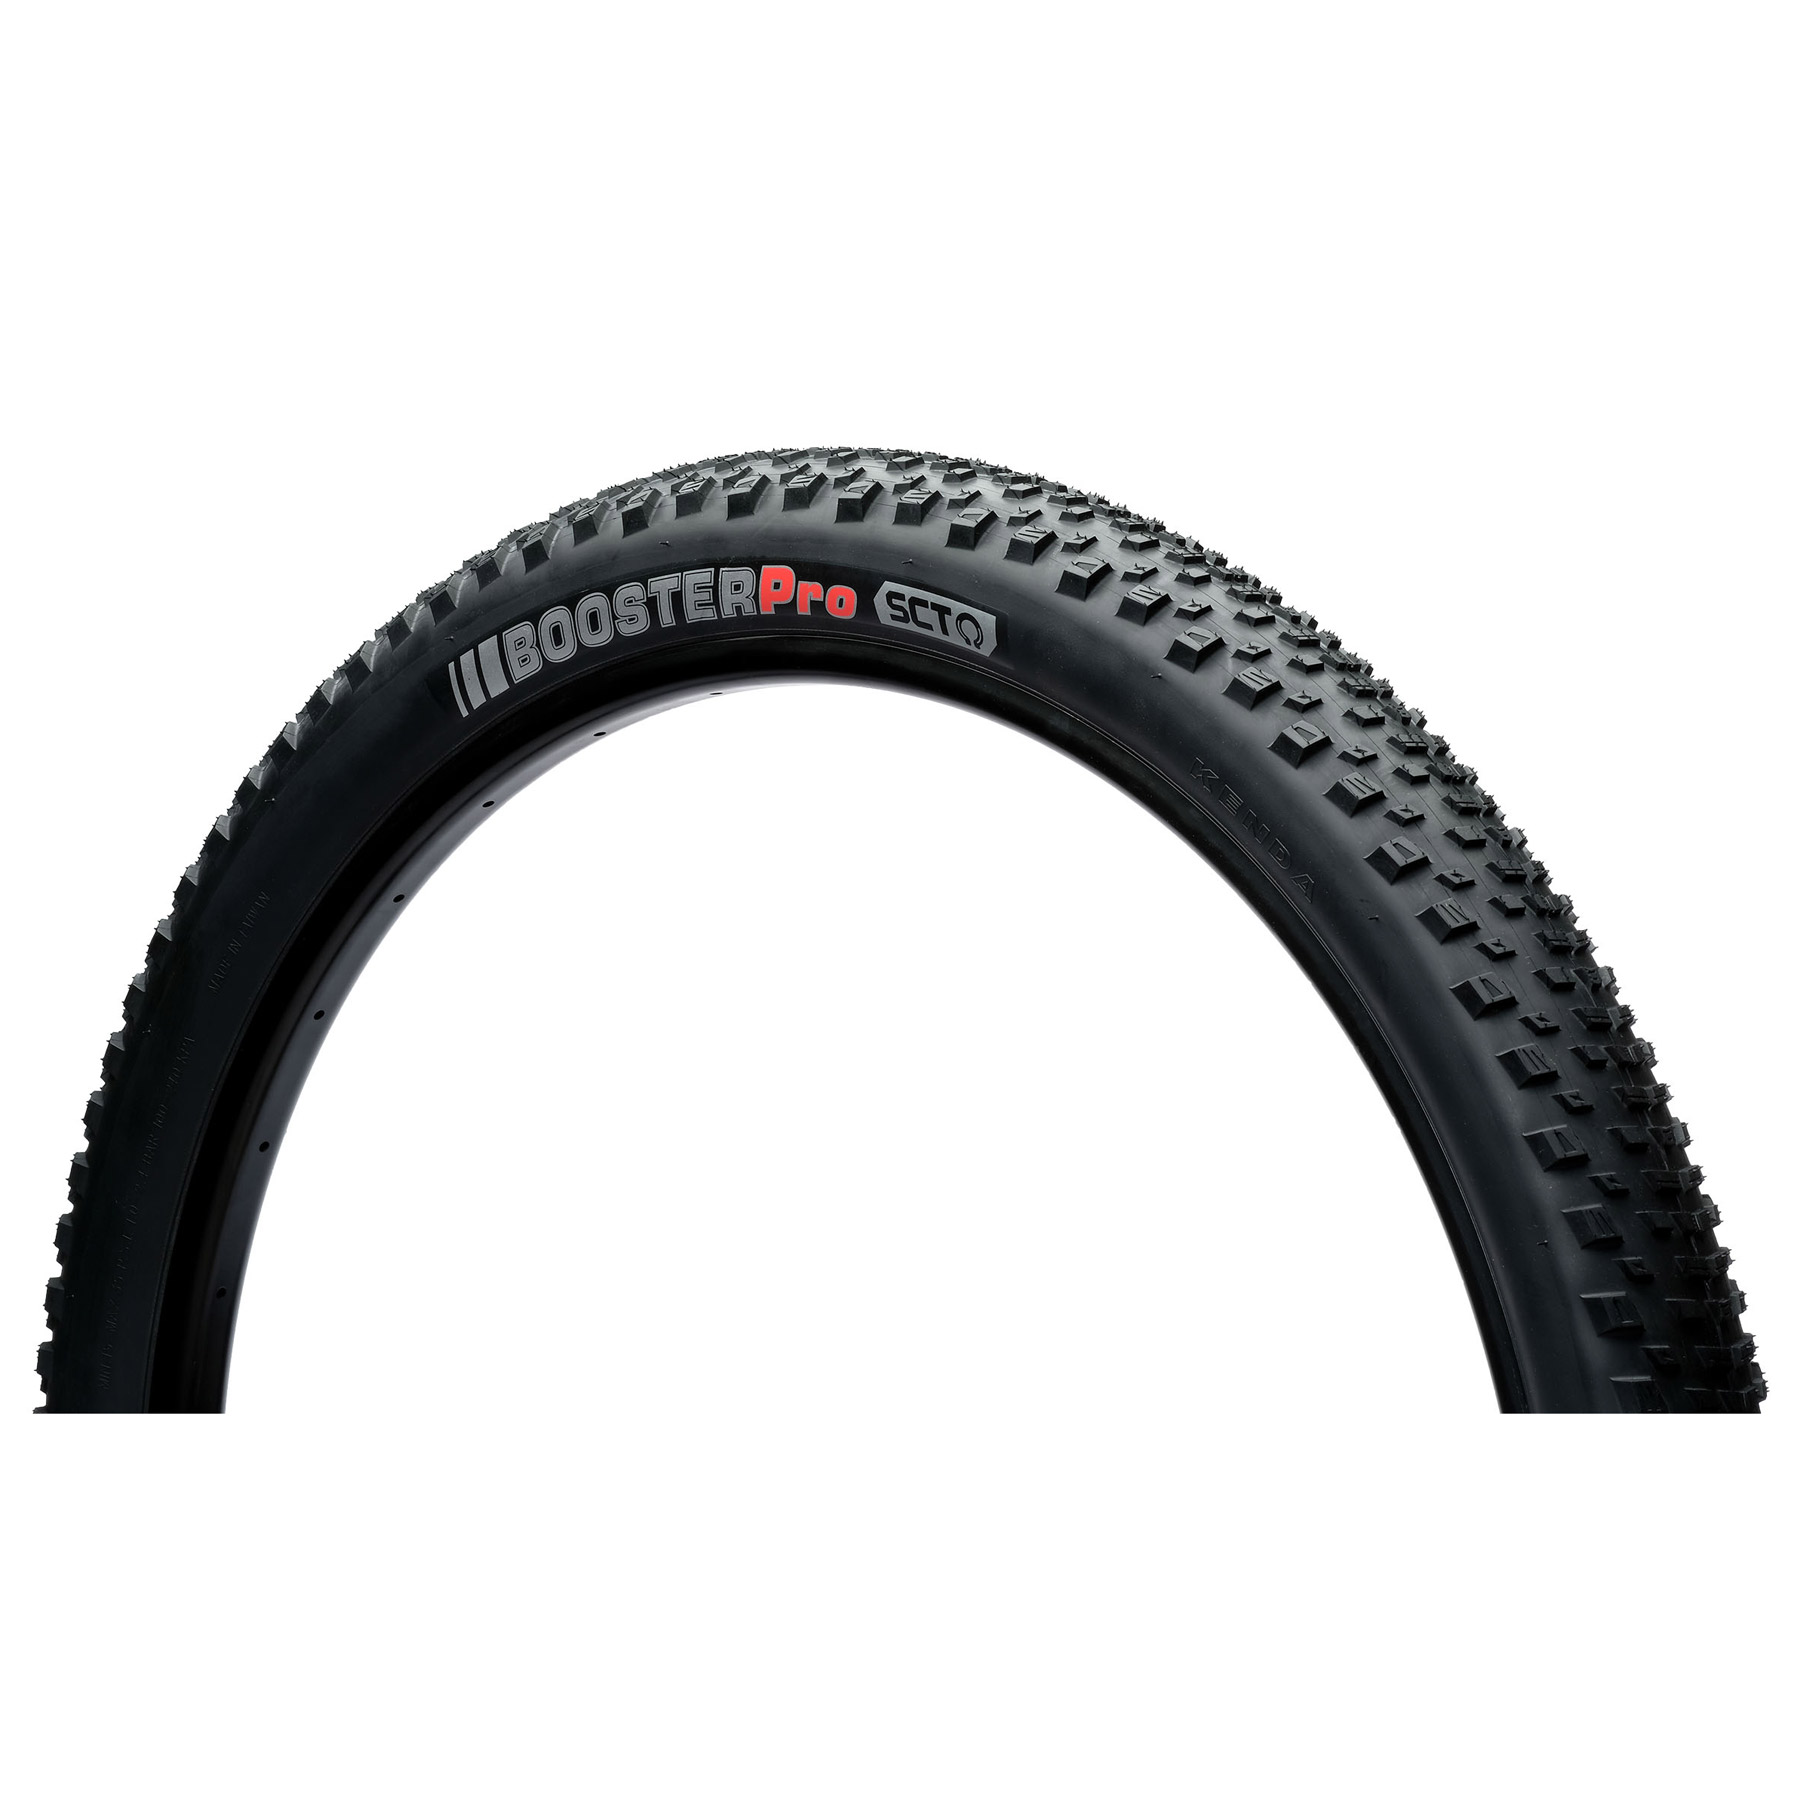 Productfoto van Kenda Booster Pro SCT Folding Tire - 29x2.20 Inches